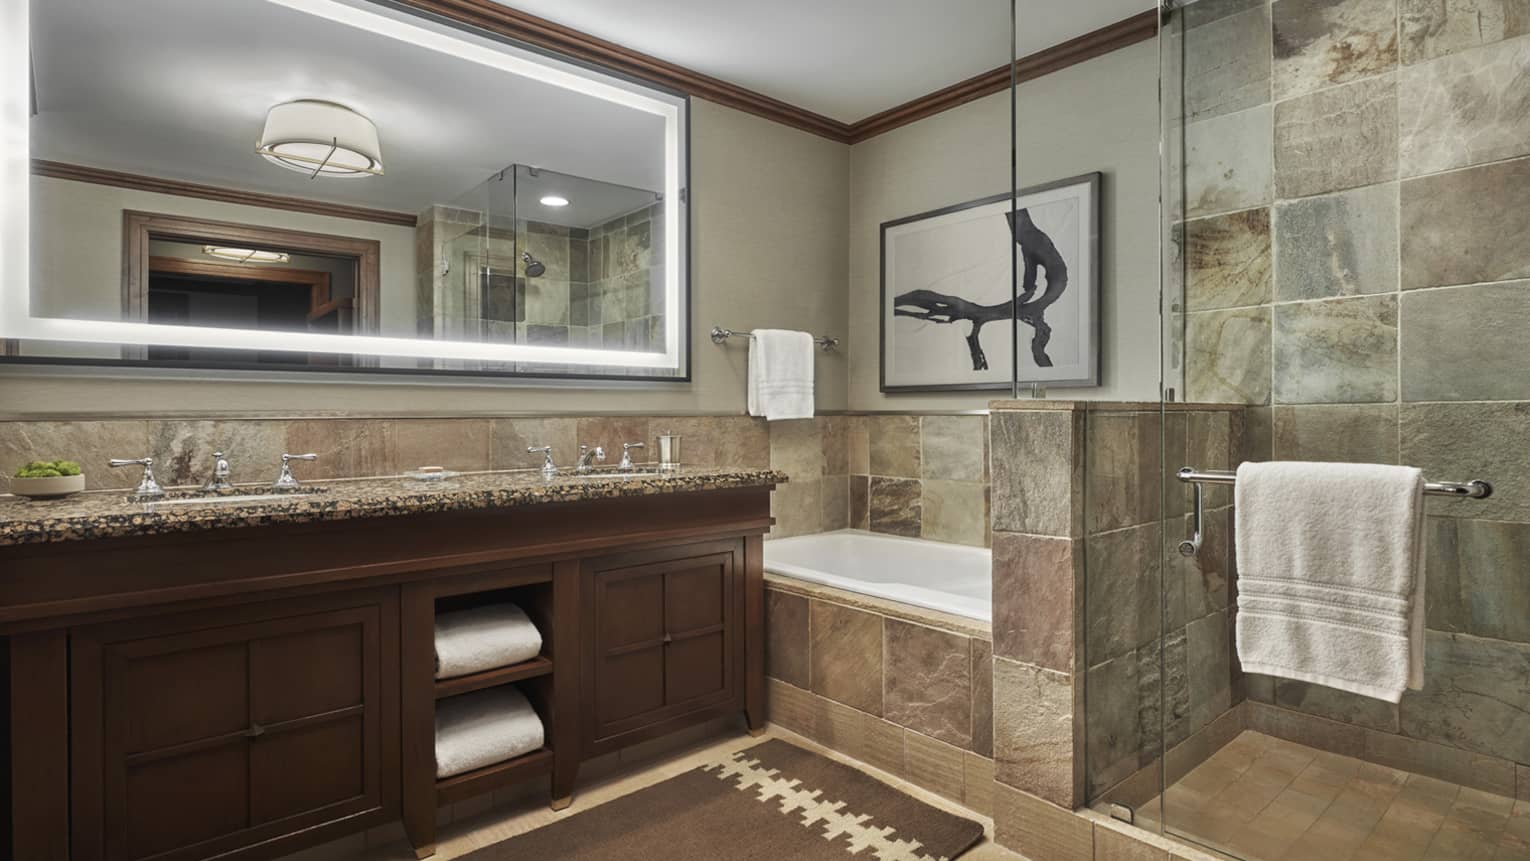 A tiled bathroom, with a double vanity, large lighted mirror and a shower and tub separated by a glass partition